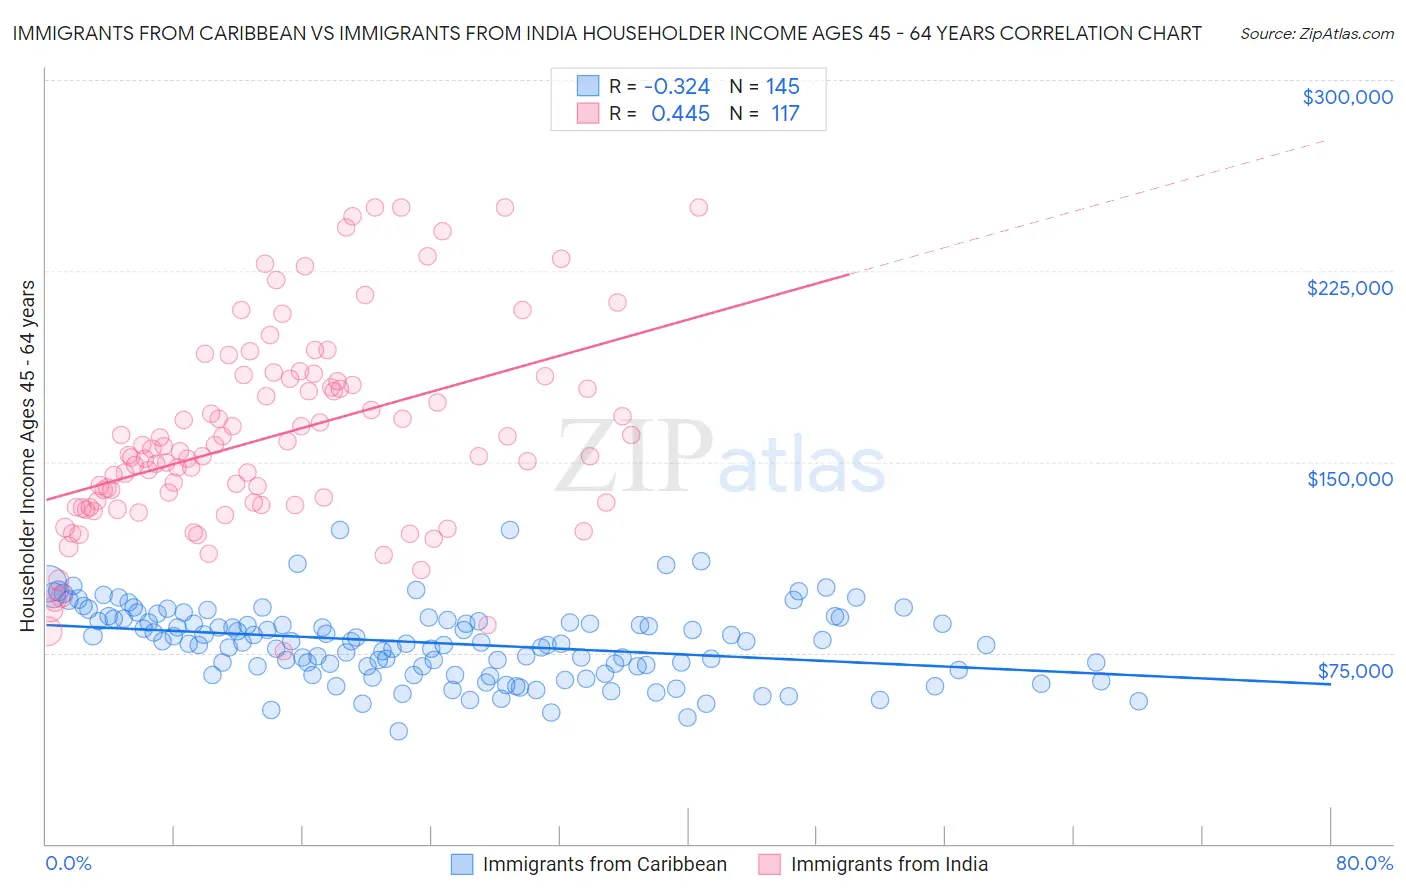 Immigrants from Caribbean vs Immigrants from India Householder Income Ages 45 - 64 years